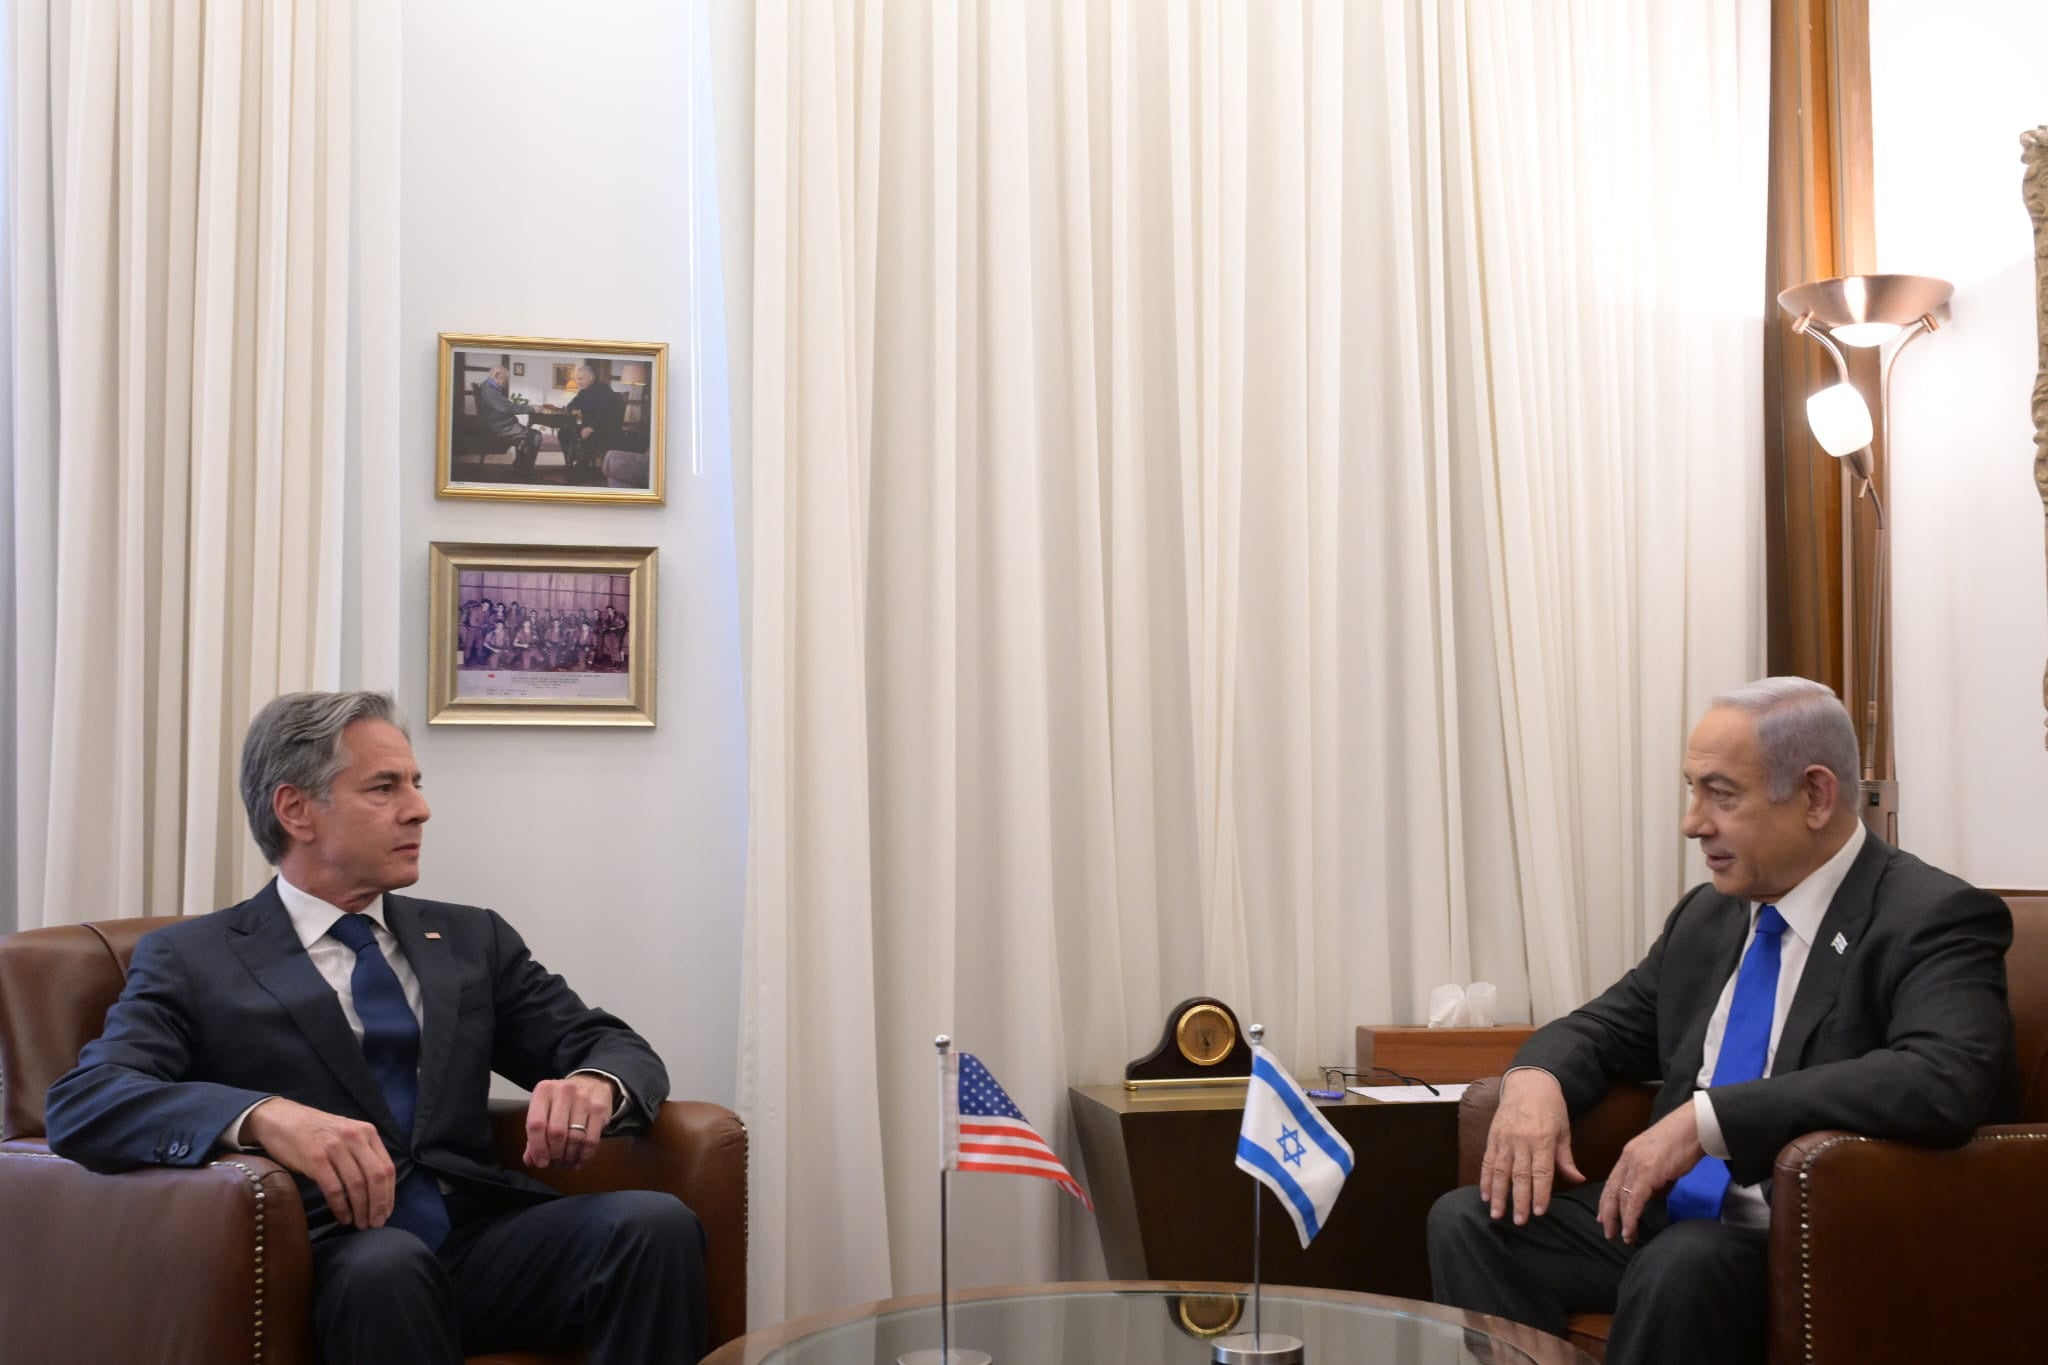 The US canceled a meeting with Israel after the country’s leader slammed the Biden administration, accusing it of withholding weapons. Pictured: Secretary of State Antony Blinken meets with Israel Minister Benjamin Netanyahu earlier this month